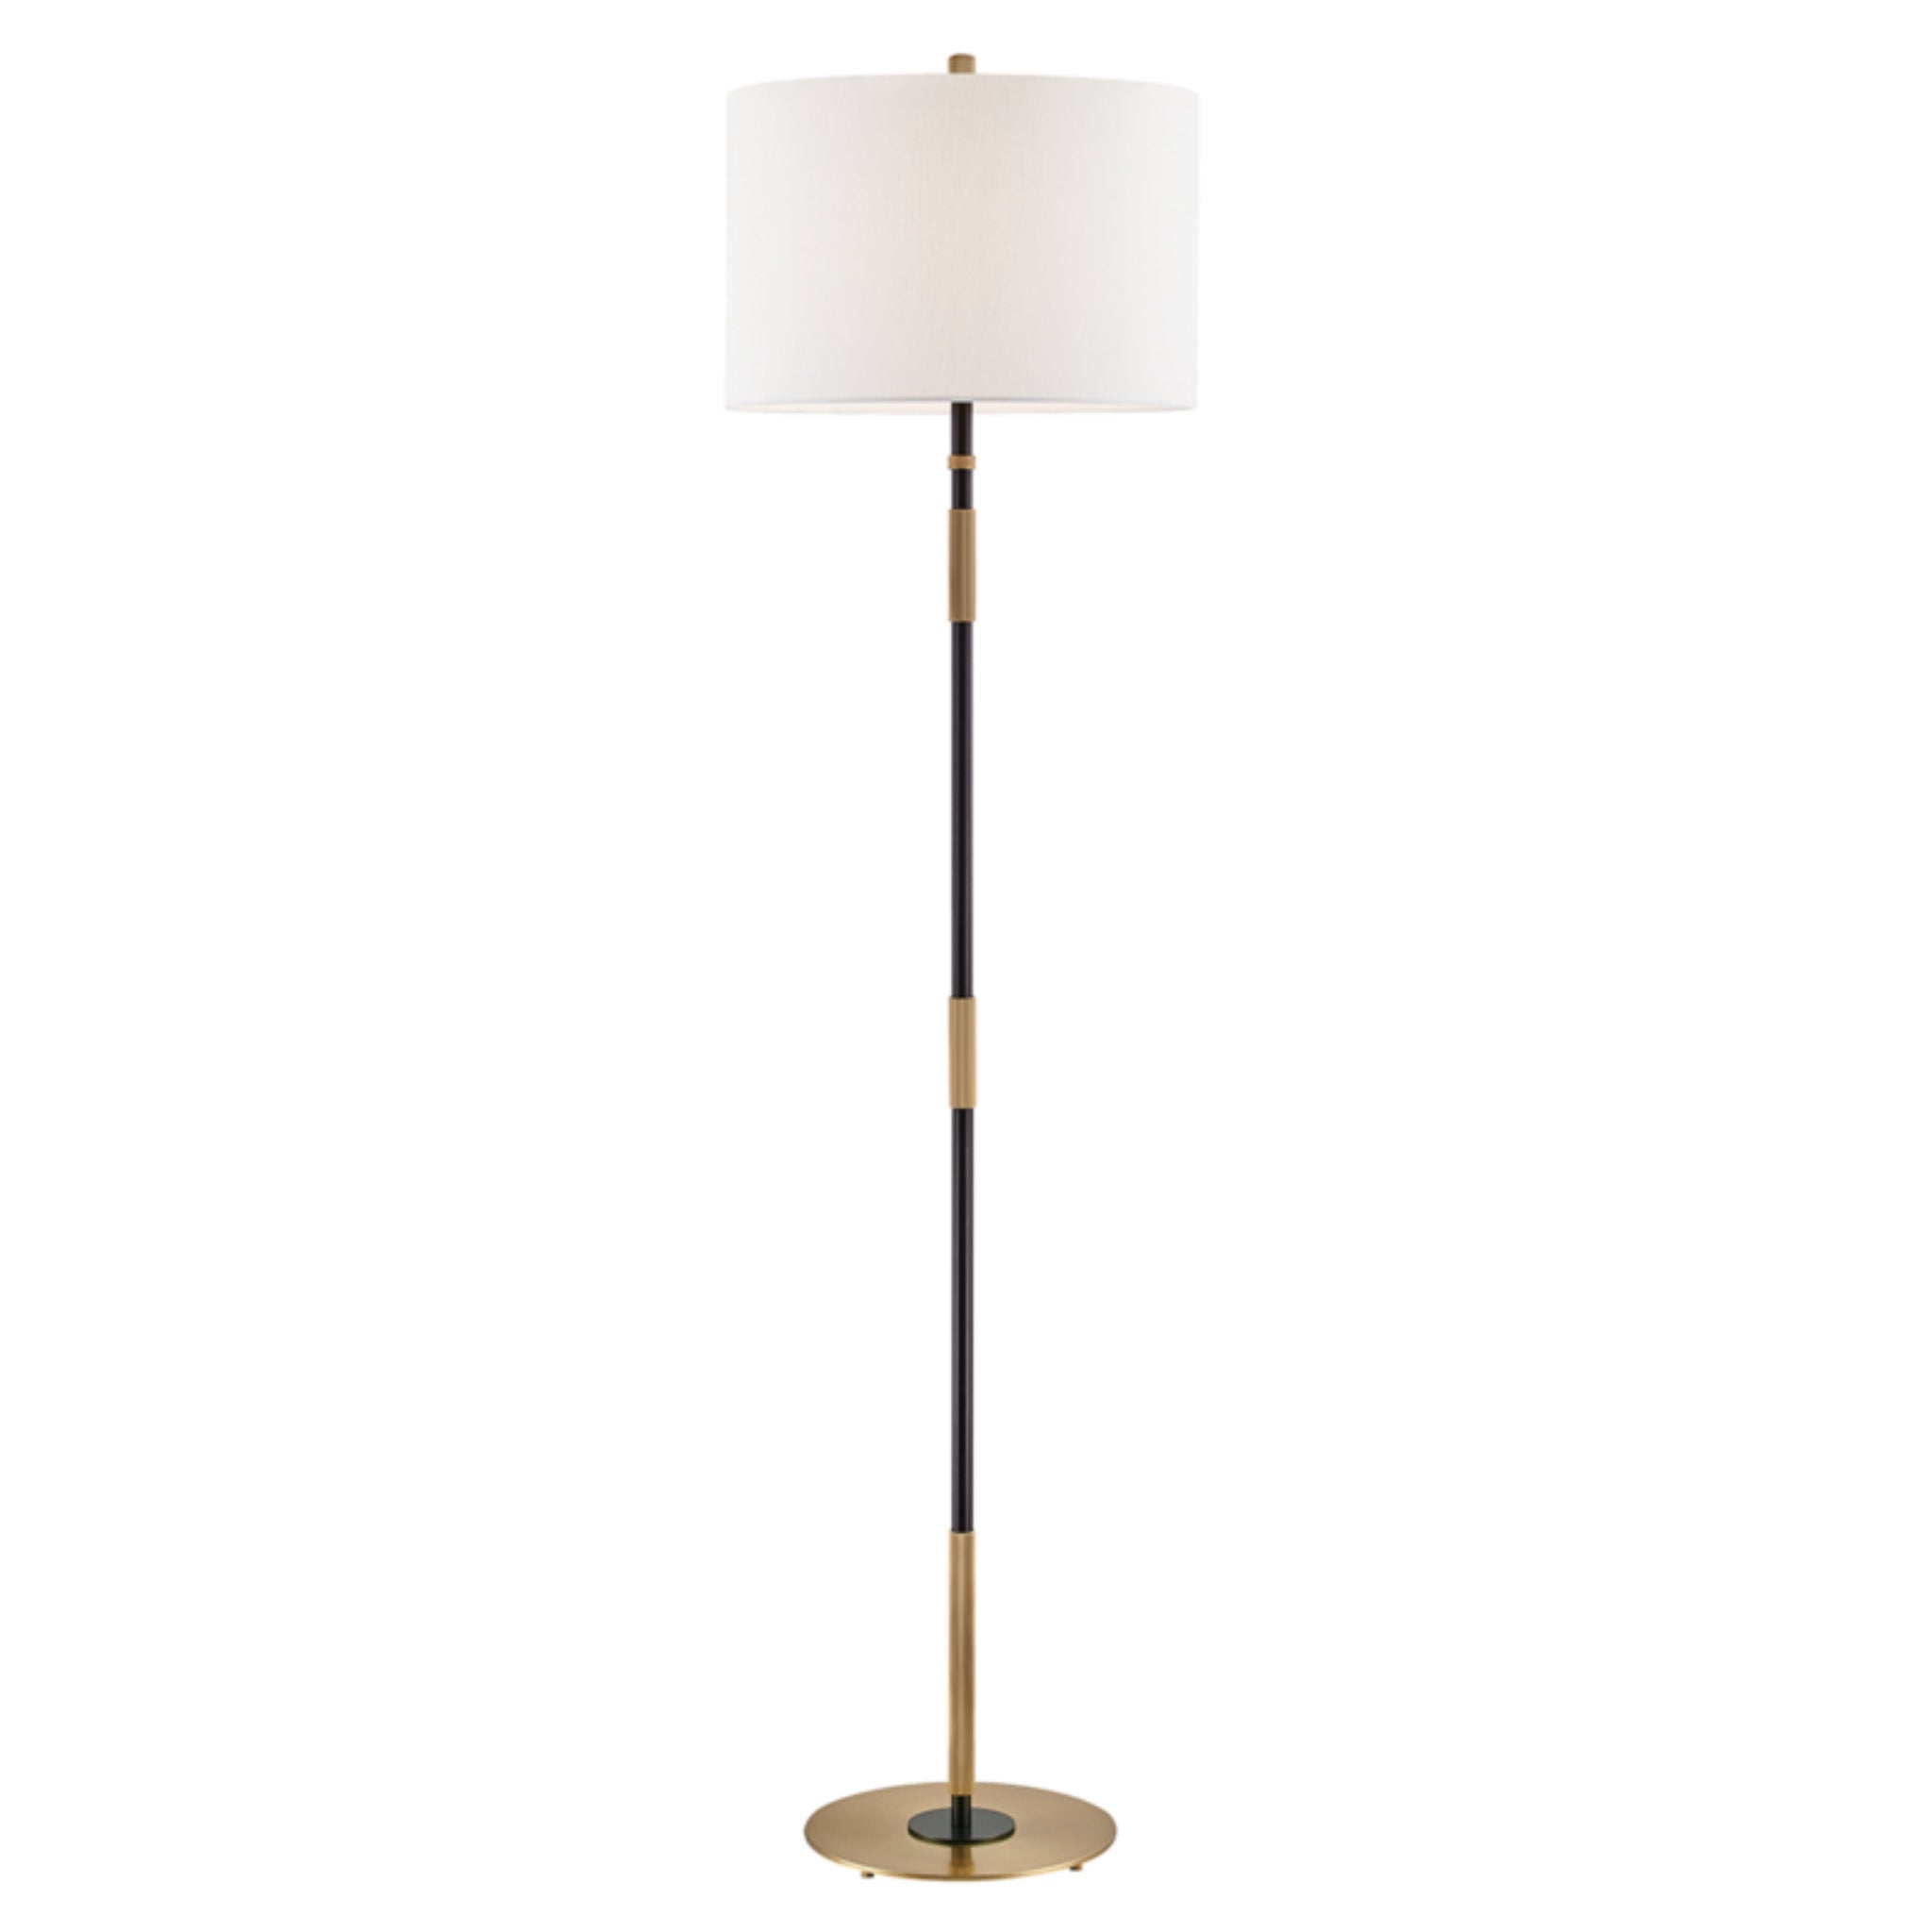 Bowery 1 Light Floor Lamp in Aged Old Bronze